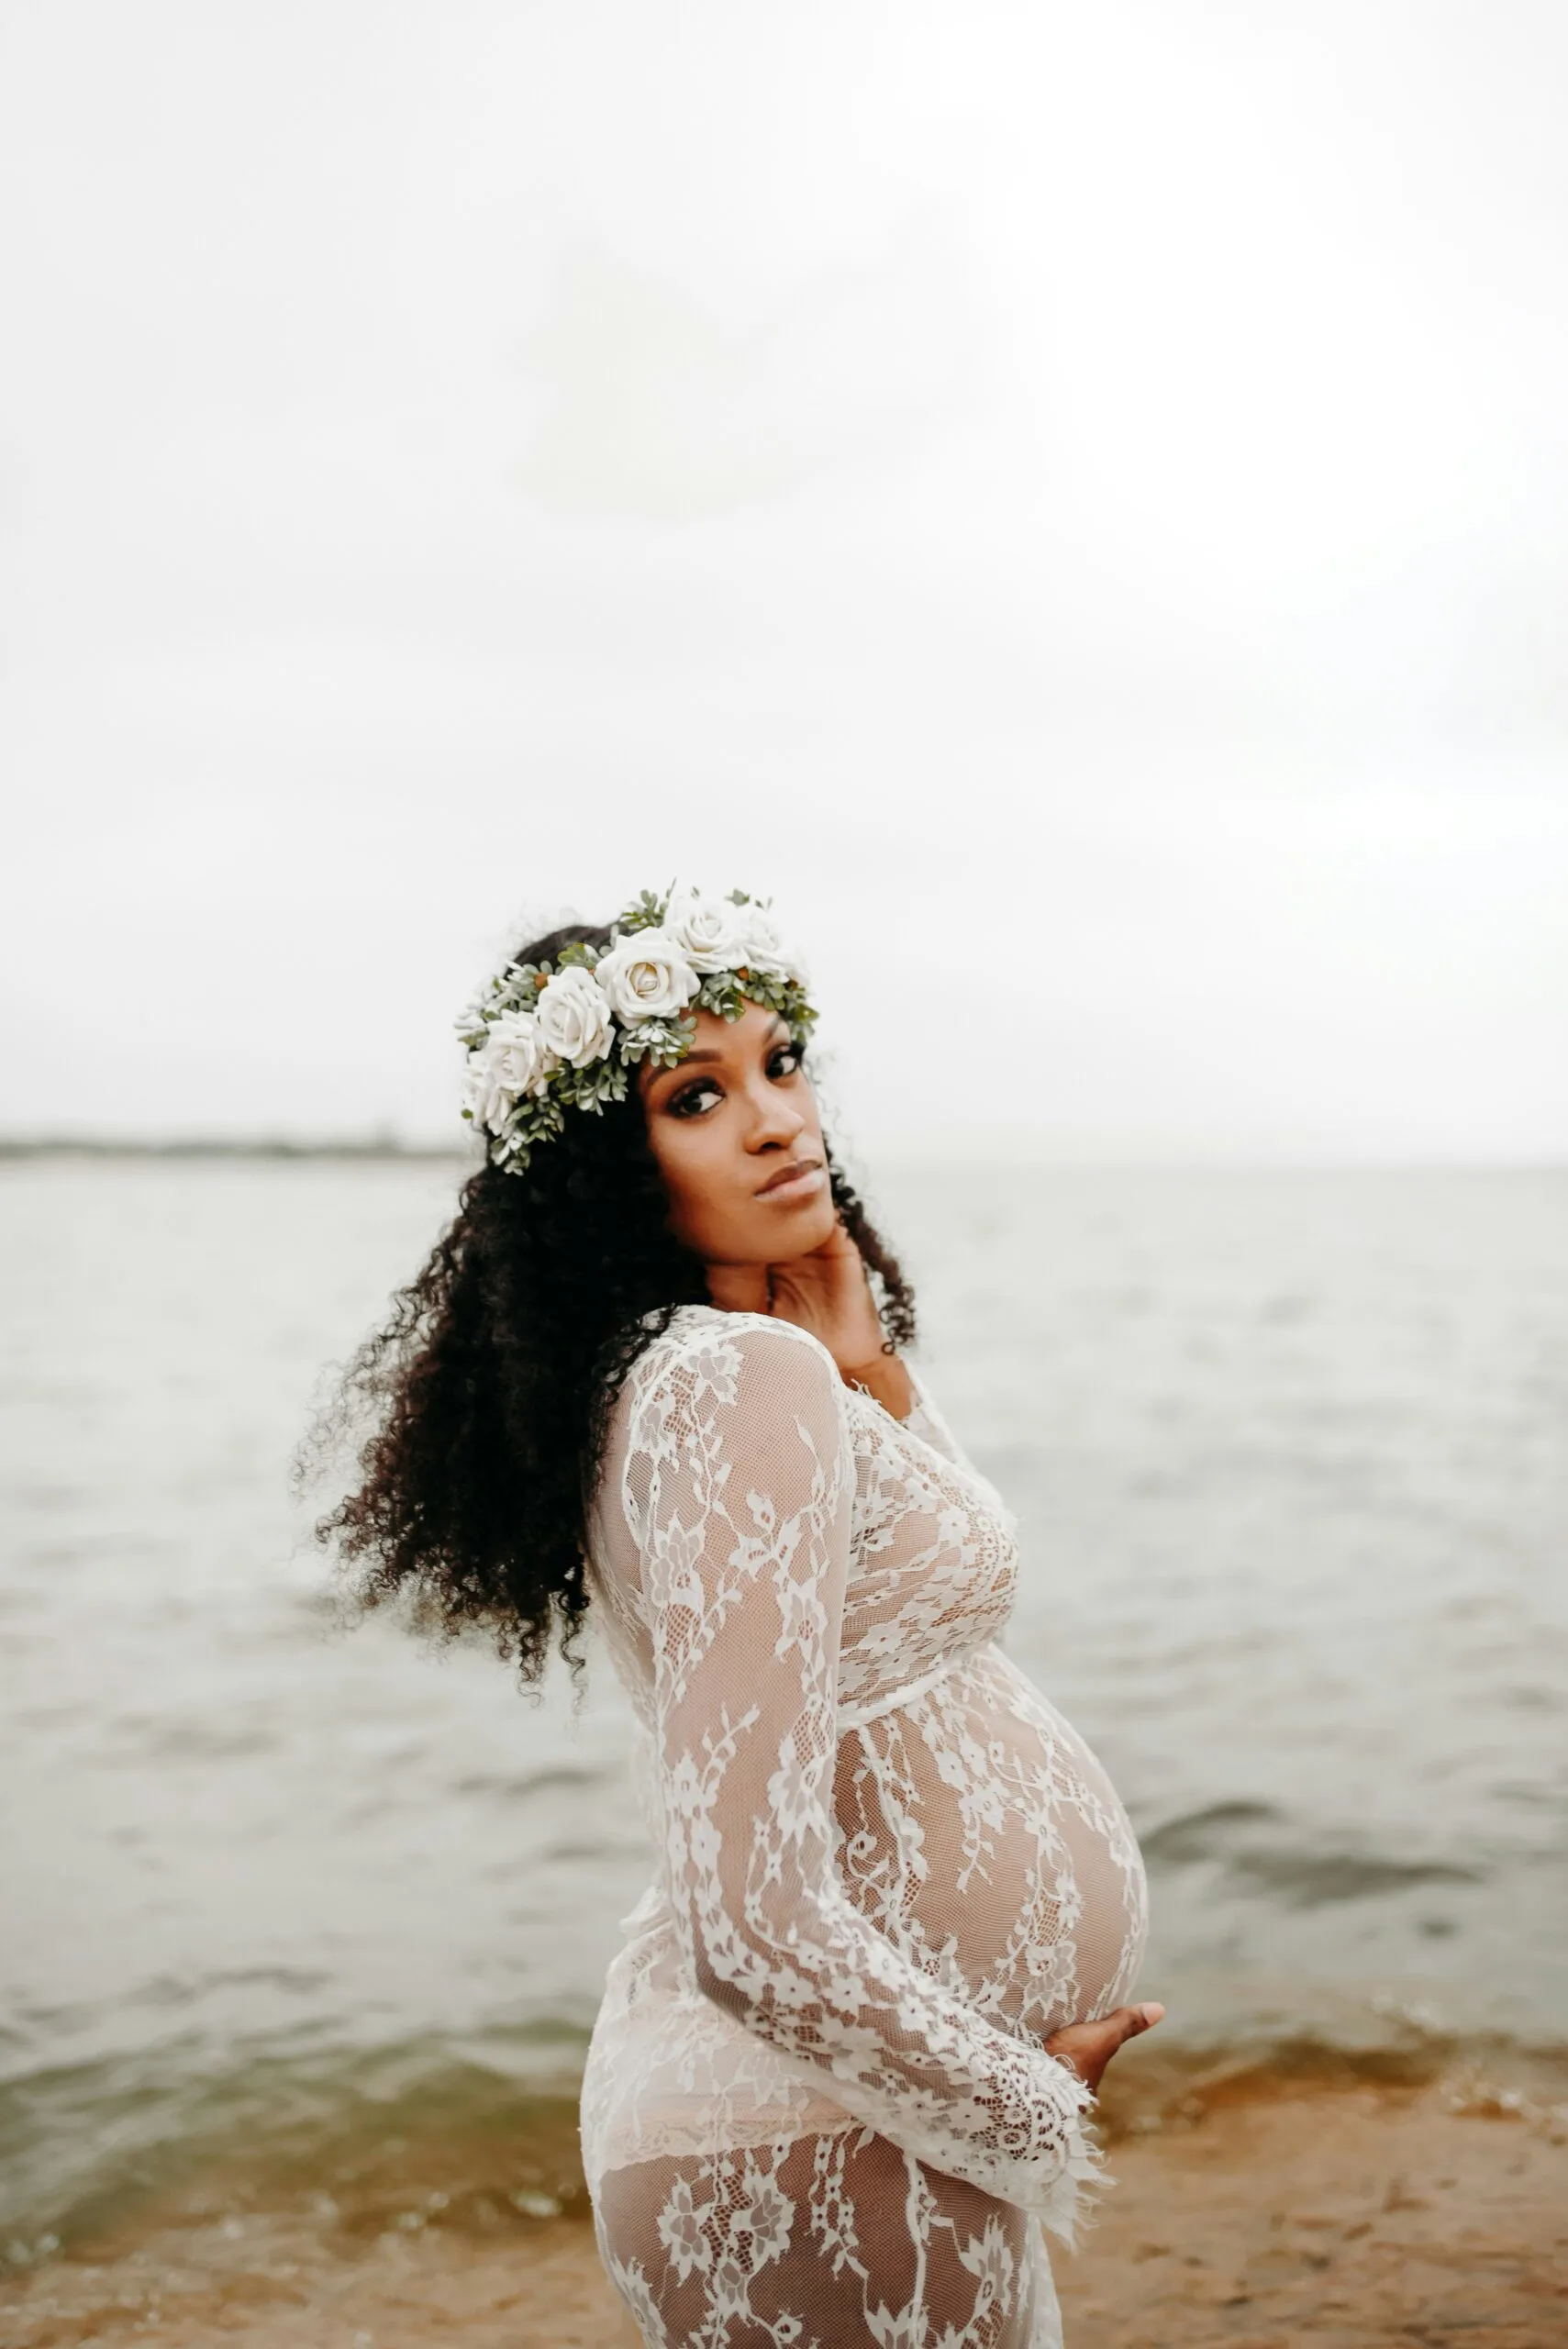 pregnancy | Pregnant mother by the beach